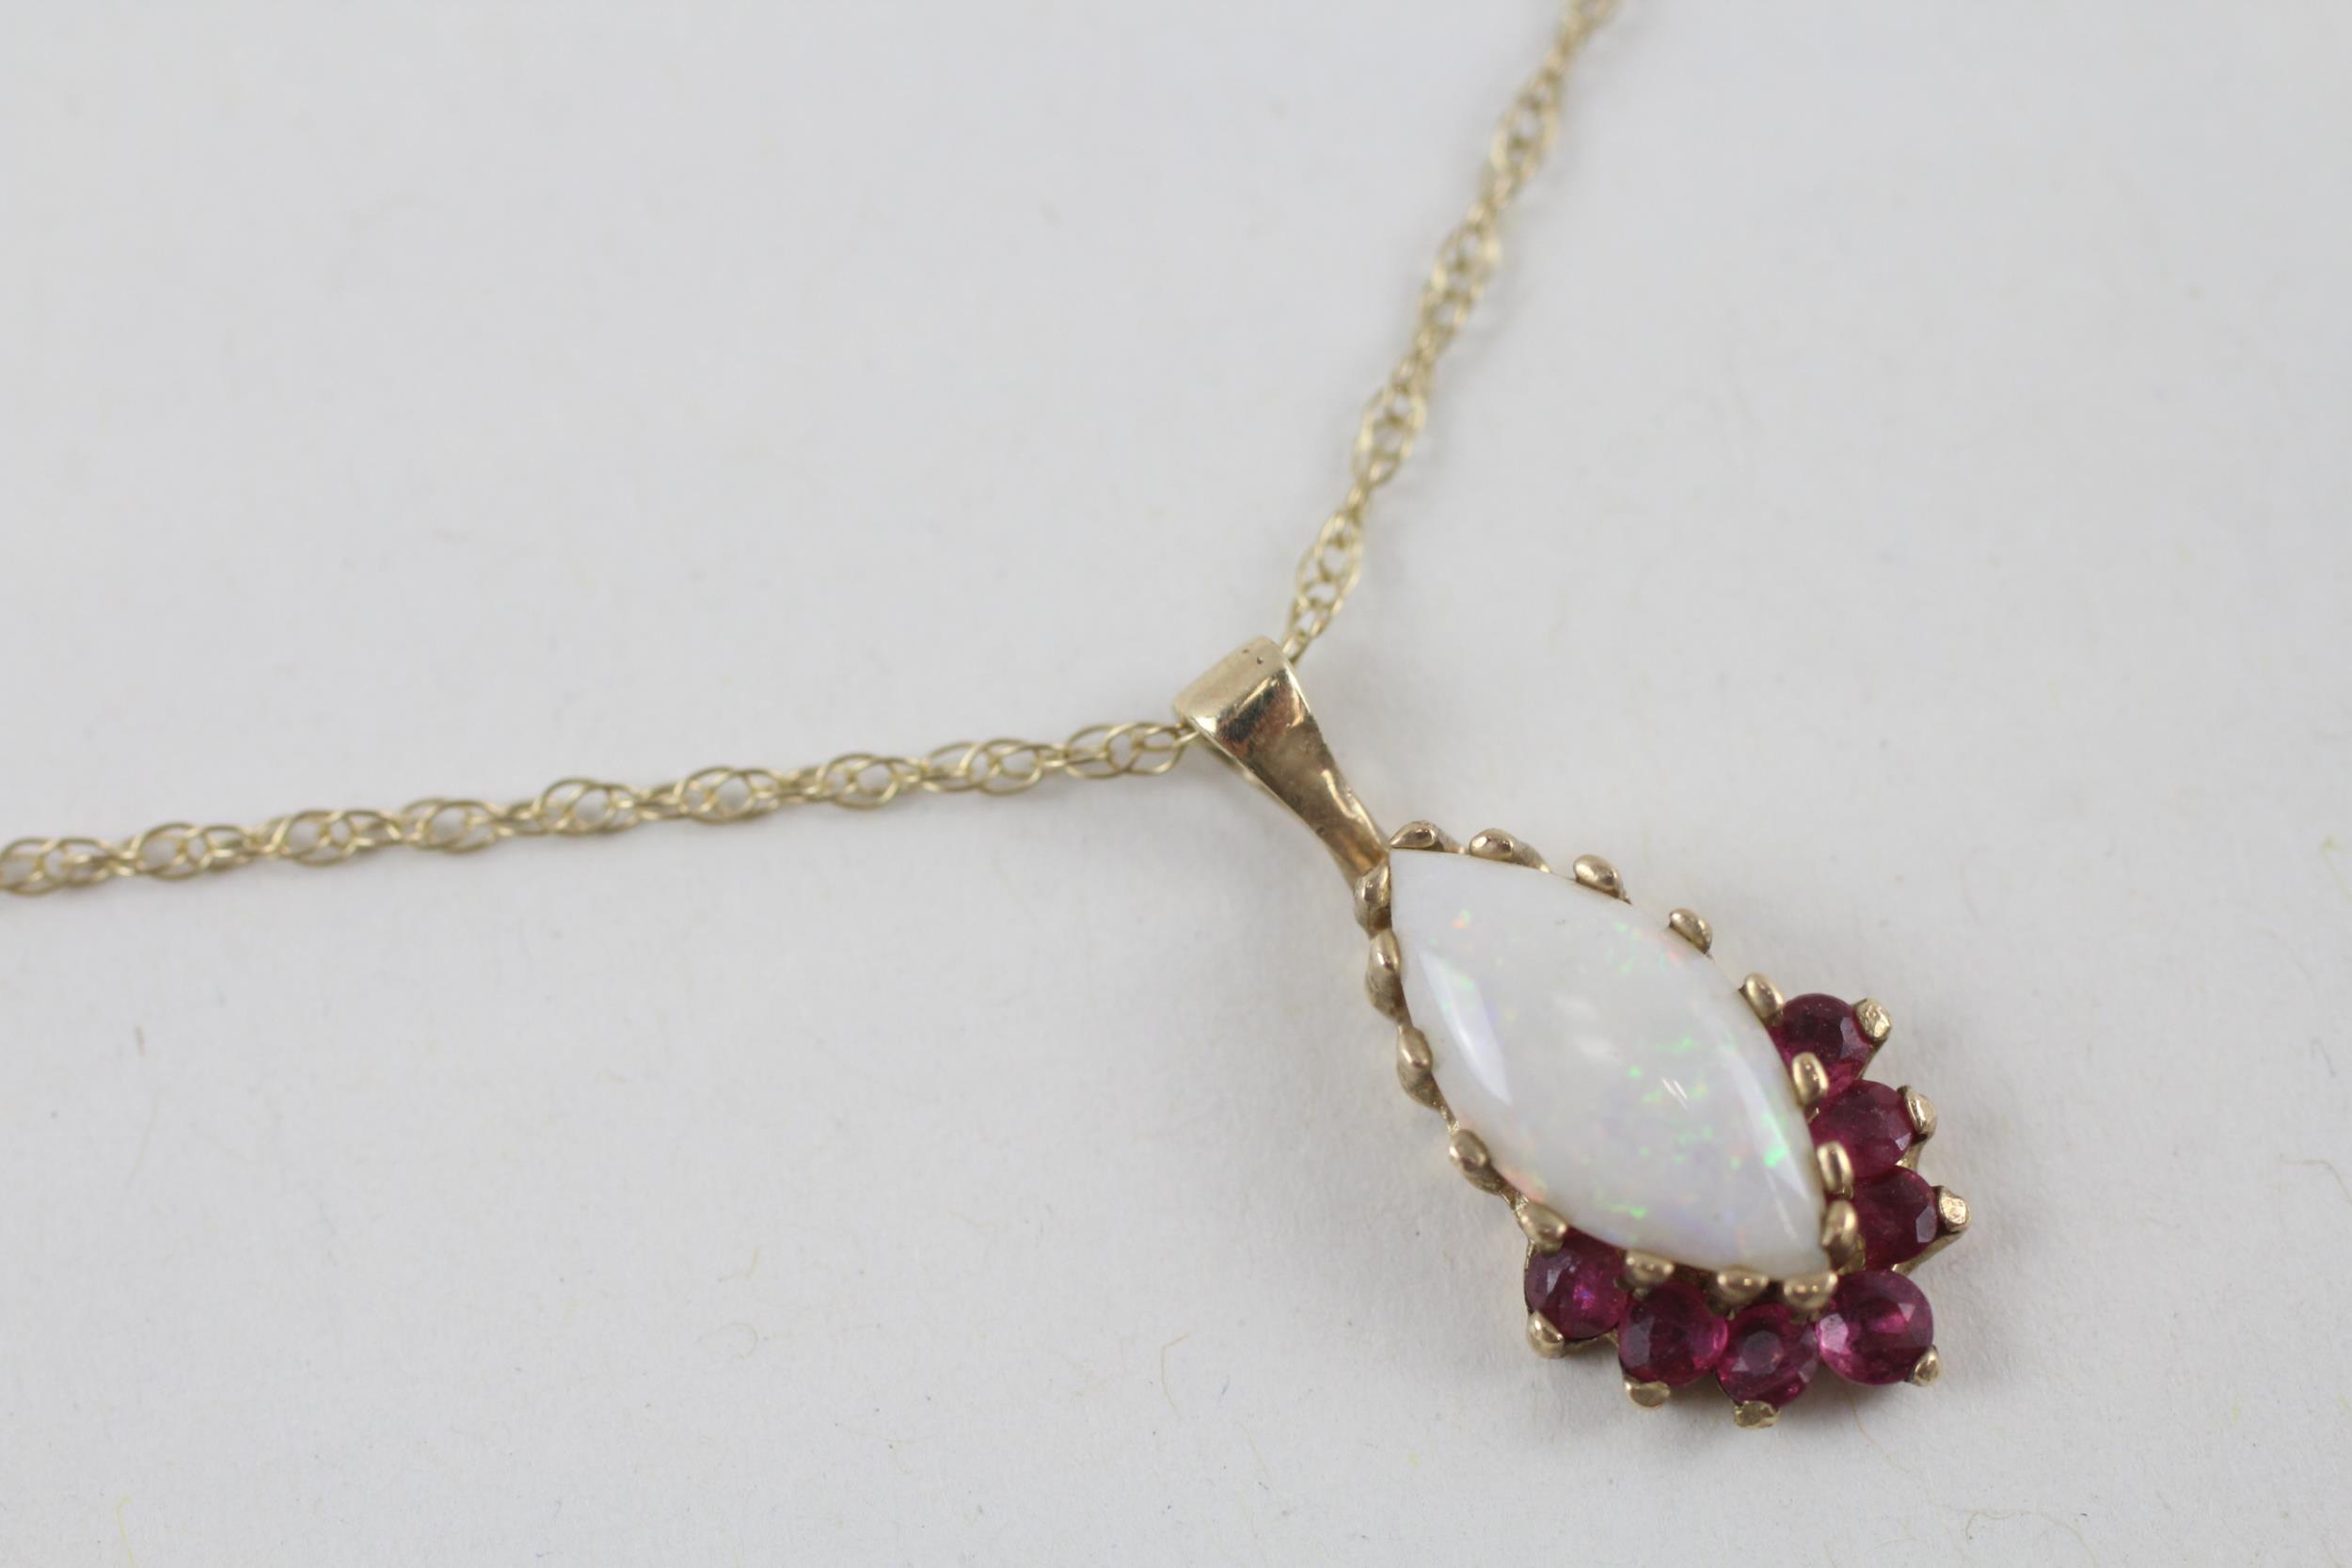 9ct gold vintage opal & ruby pendant necklace (1.7g) - Image 4 of 6